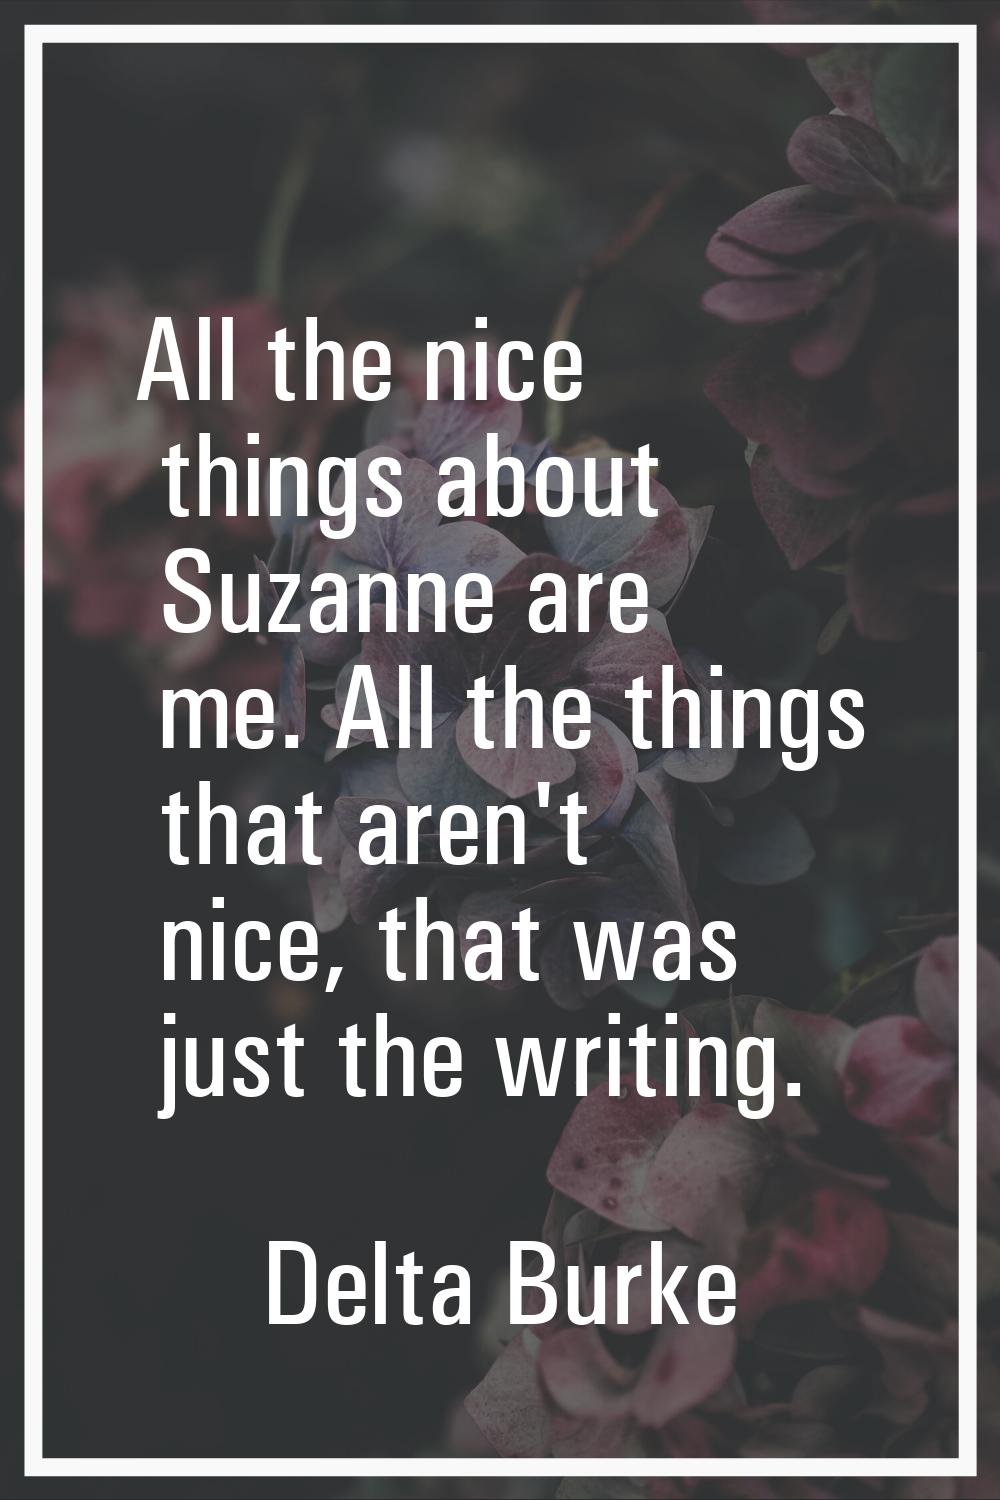 All the nice things about Suzanne are me. All the things that aren't nice, that was just the writin